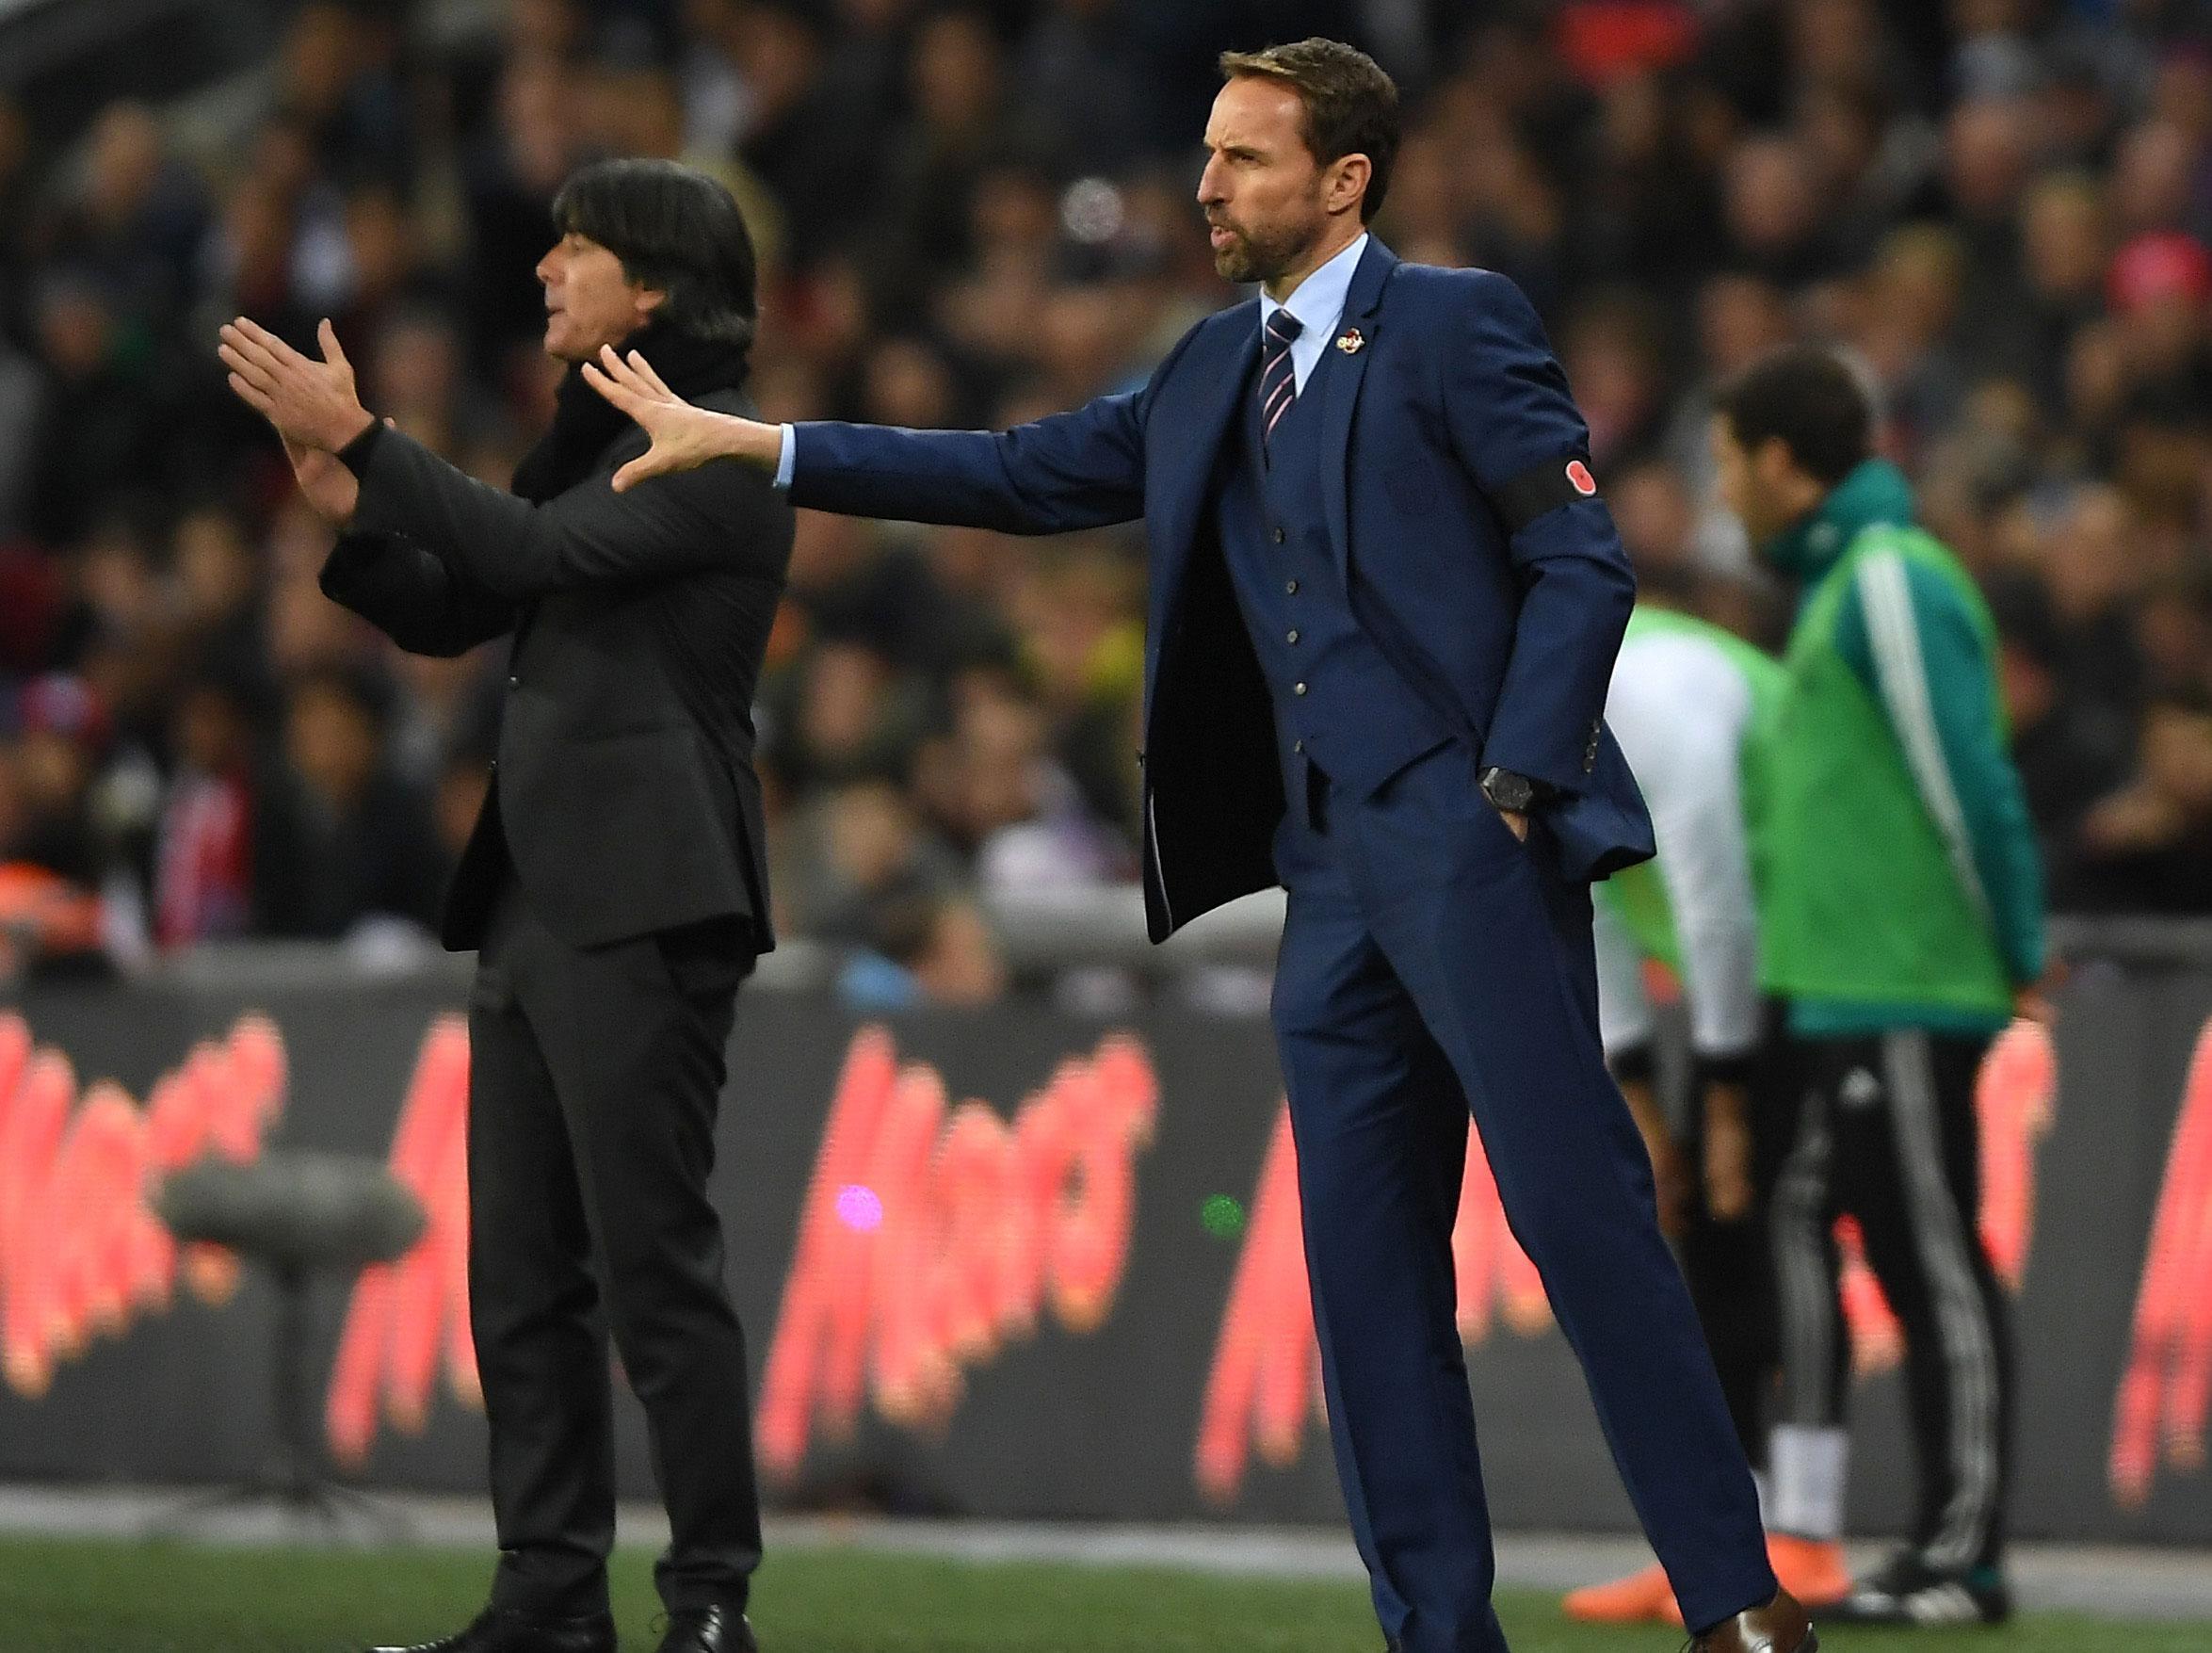 Southgate has work to do ahead of Russia